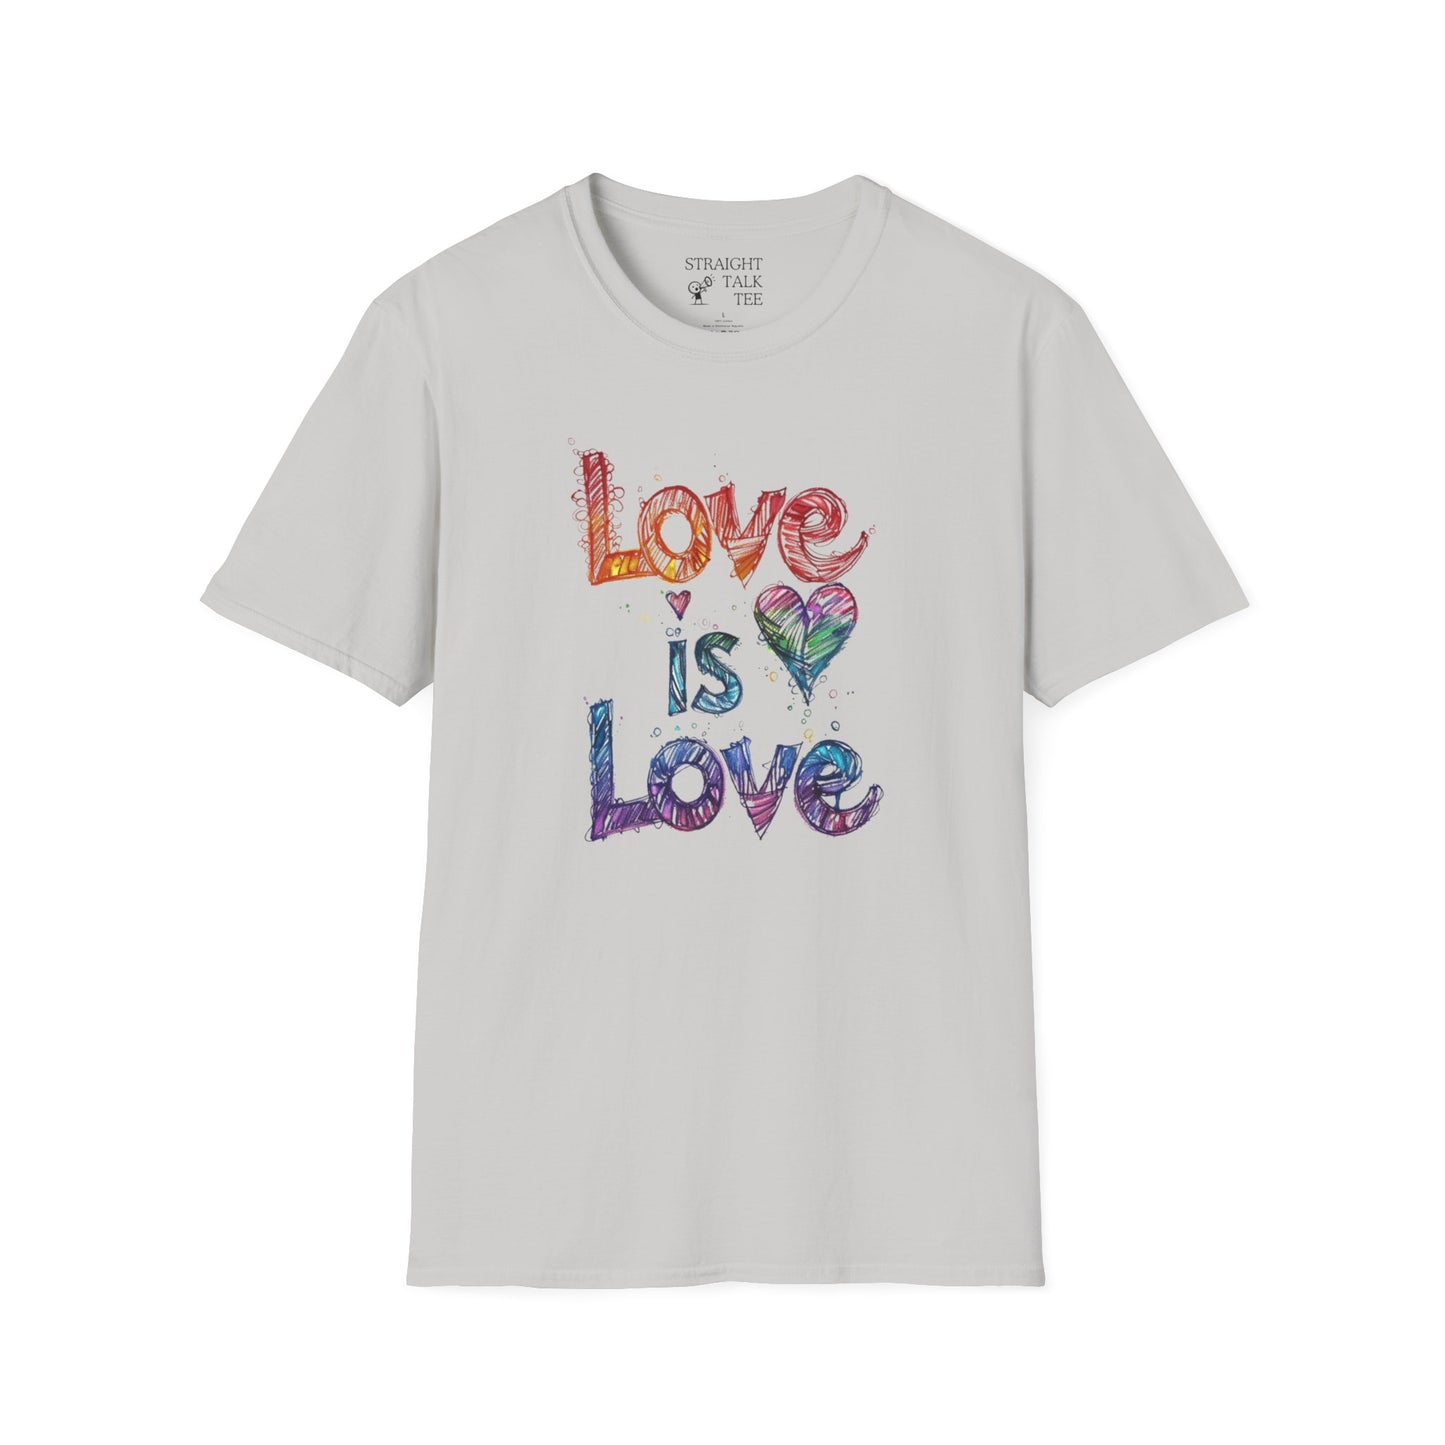 Love is Love T-Shirt | Show Your Pride Shirt!